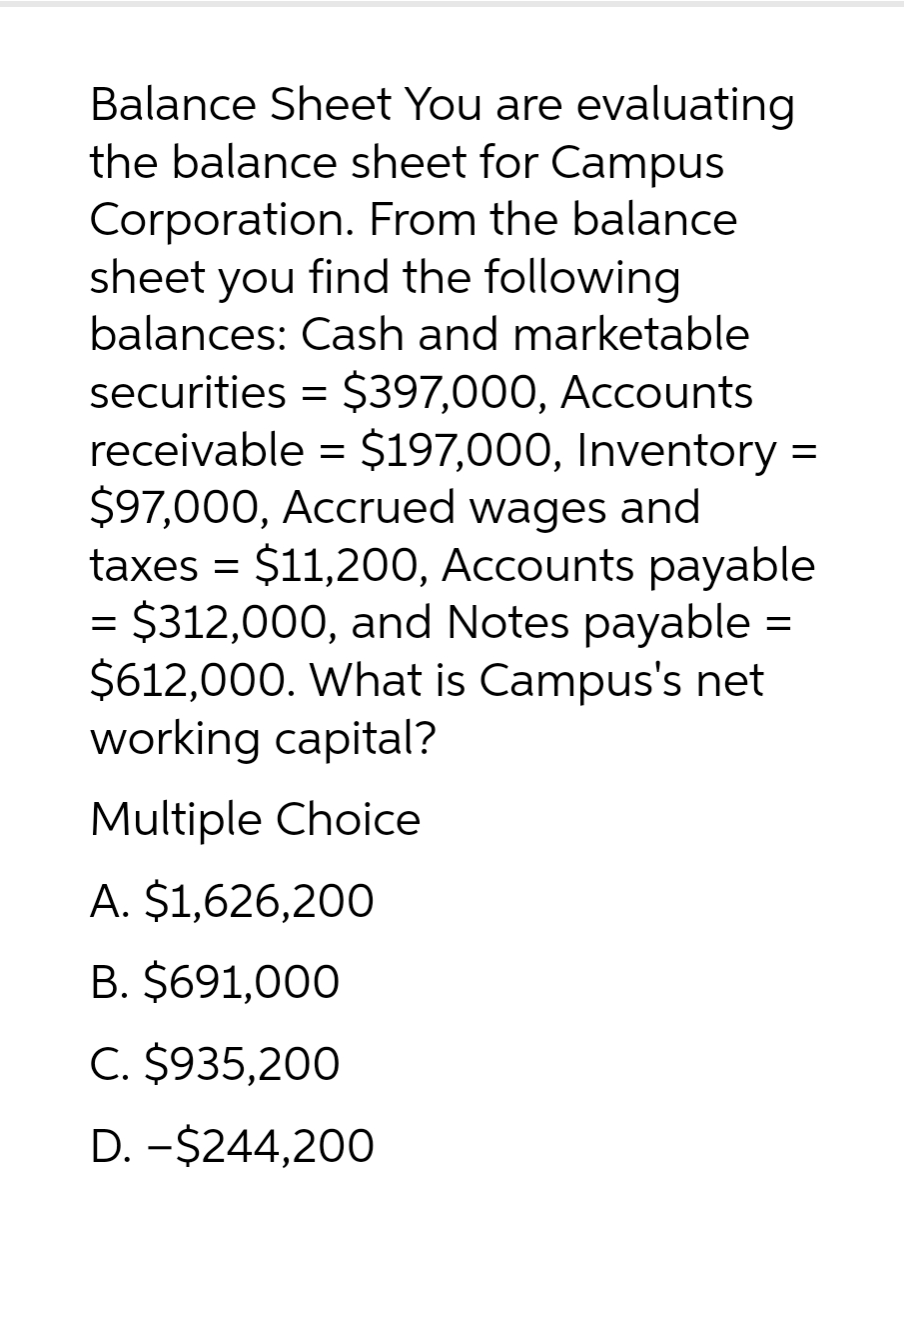 Balance Sheet You are evaluating
the balance sheet for Campus
Corporation. From the balance
sheet you find the following
balances: Cash and marketable
securities = $397,000, Accounts
receivable = $197,000, Inventory =
$97,000, Accrued wages and
taxes = $11,200, Accounts payable
$312,000, and Notes payable
$612,000. What is Campus's net
working capital?
Multiple Choice
A. $1,626,200
B. $691,000
C. $935,200
D. -$244,200